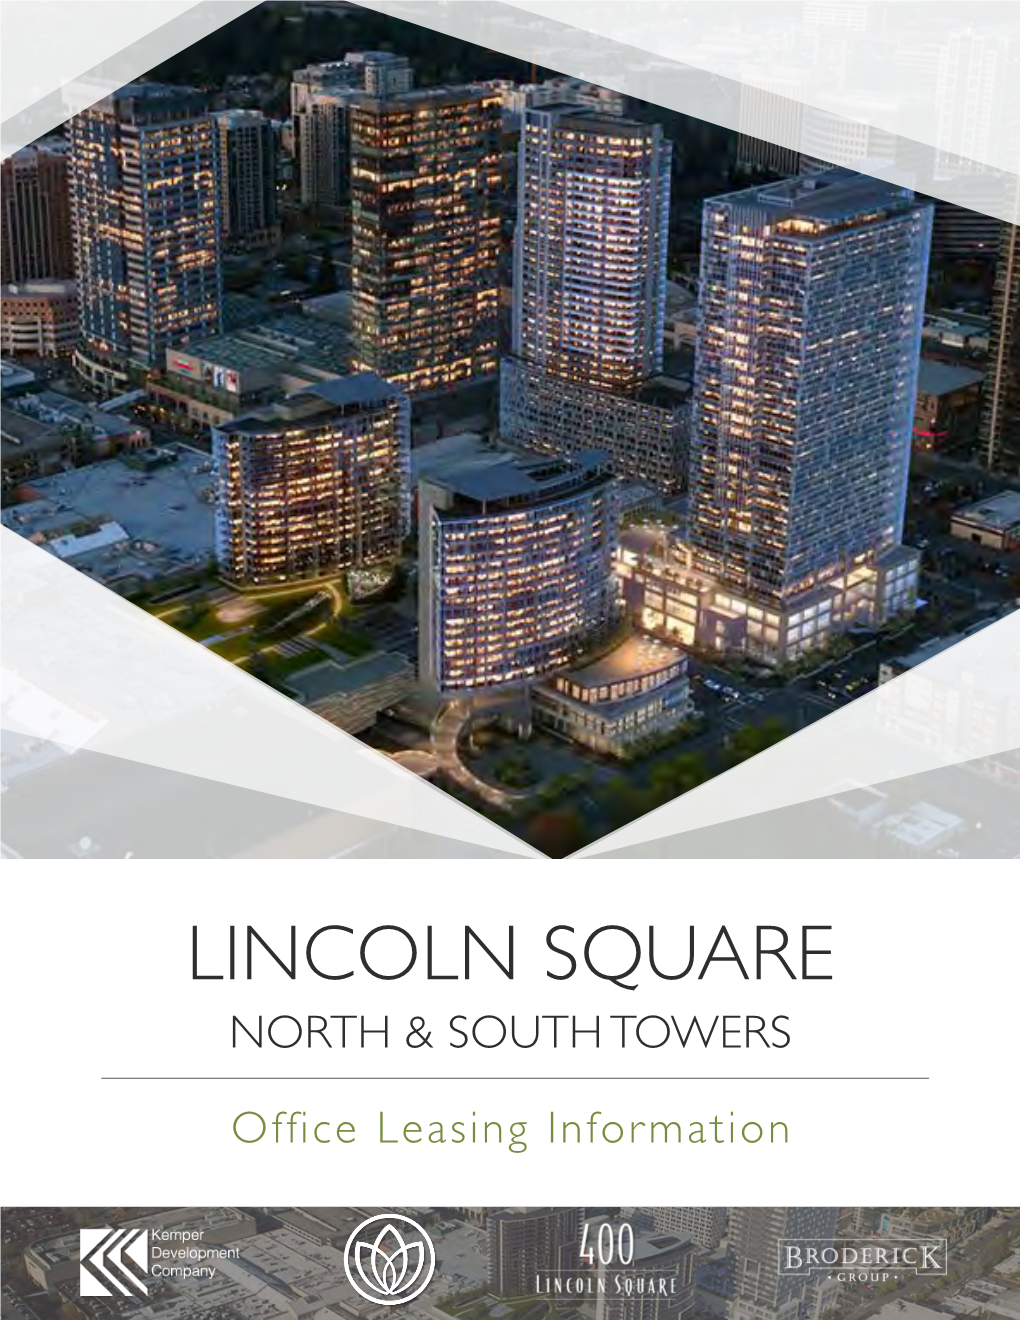 Lincoln Square North & South Towers